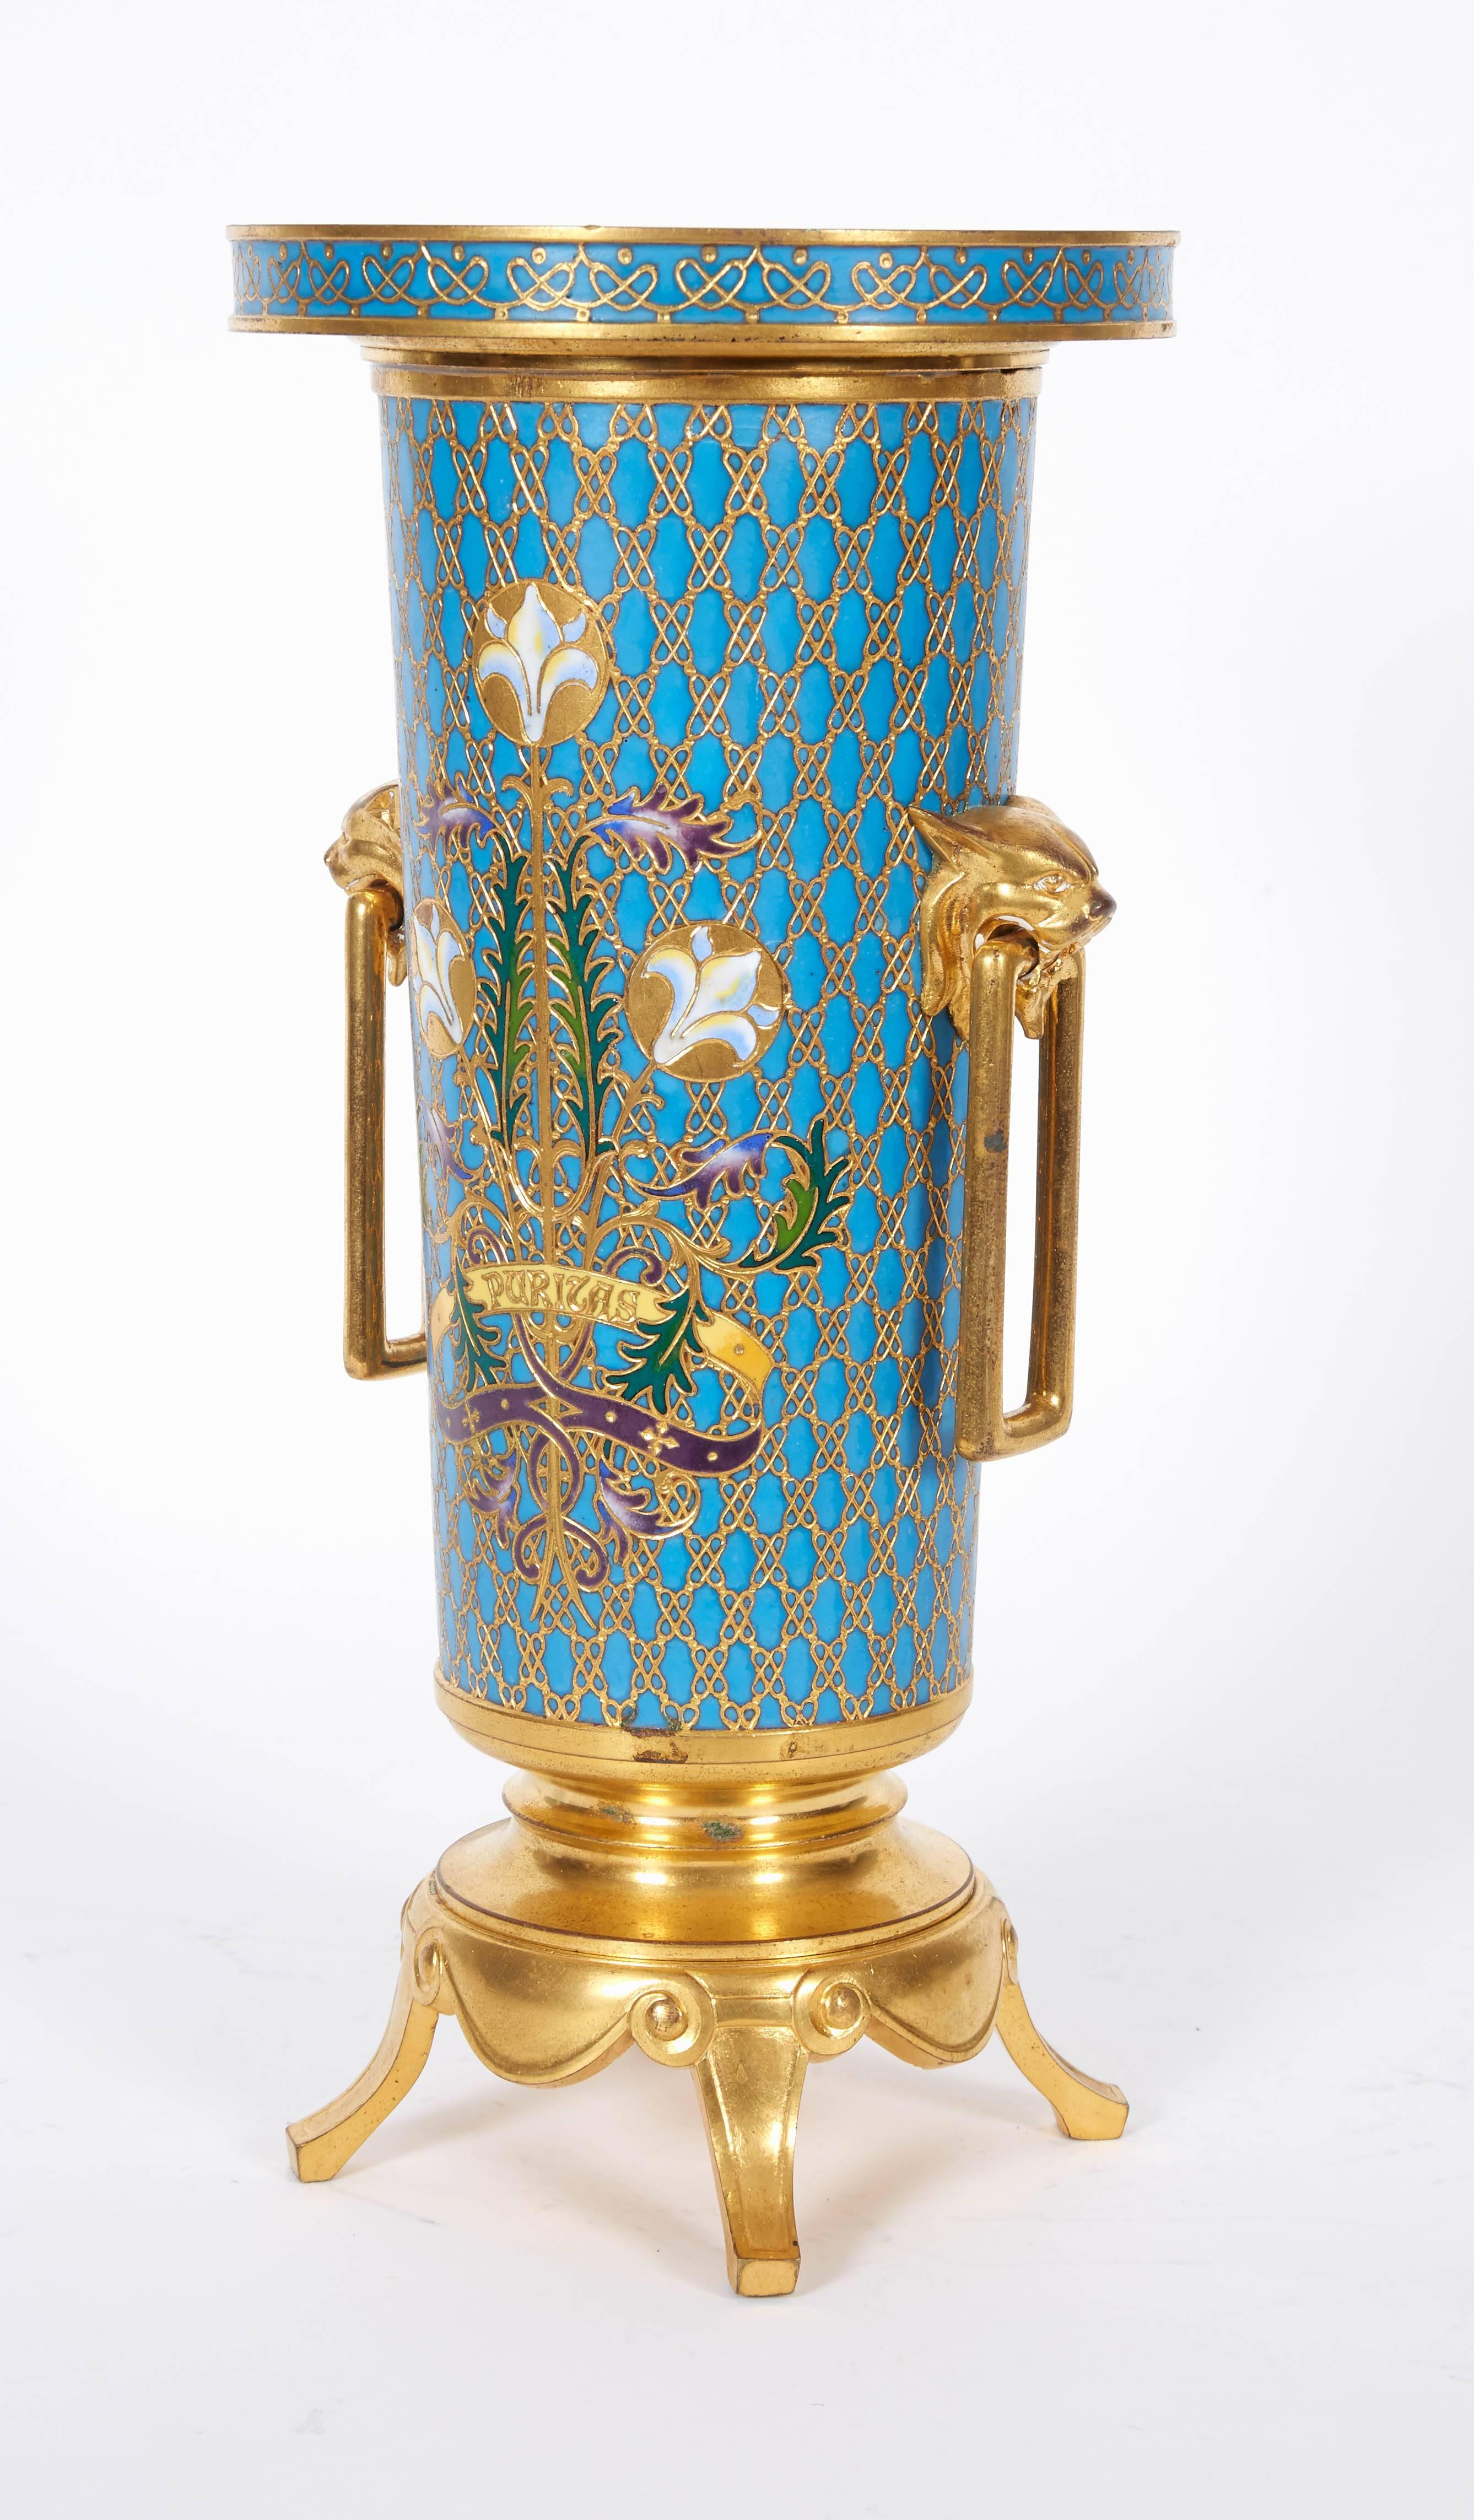 19th Century French Gilt Bronze and Champleve Cloisonne Enamel Vase by Ferdinand Barbedienne